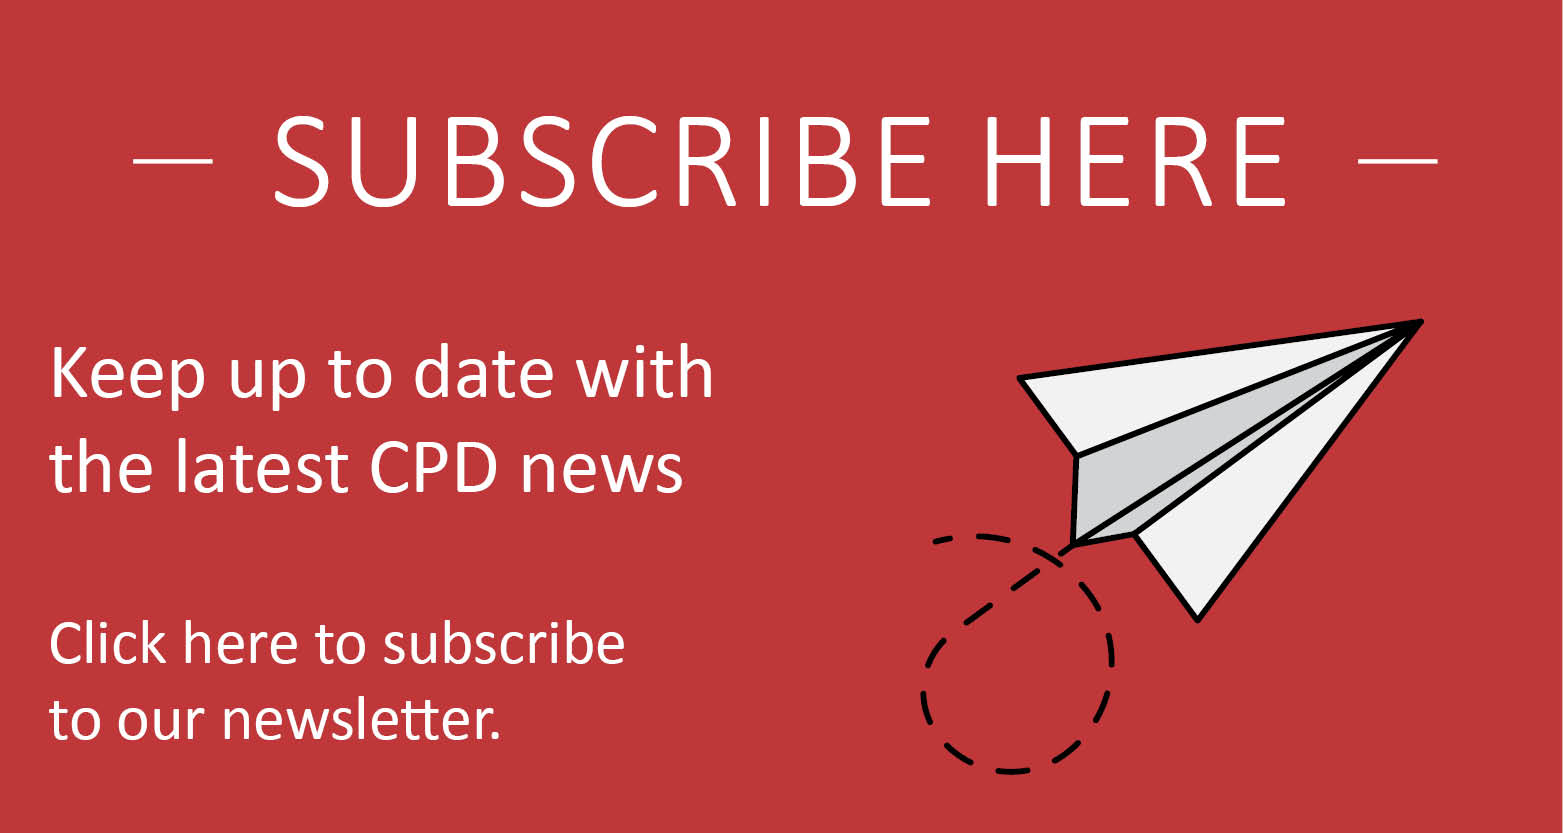 Subscribe for more information on our CPD